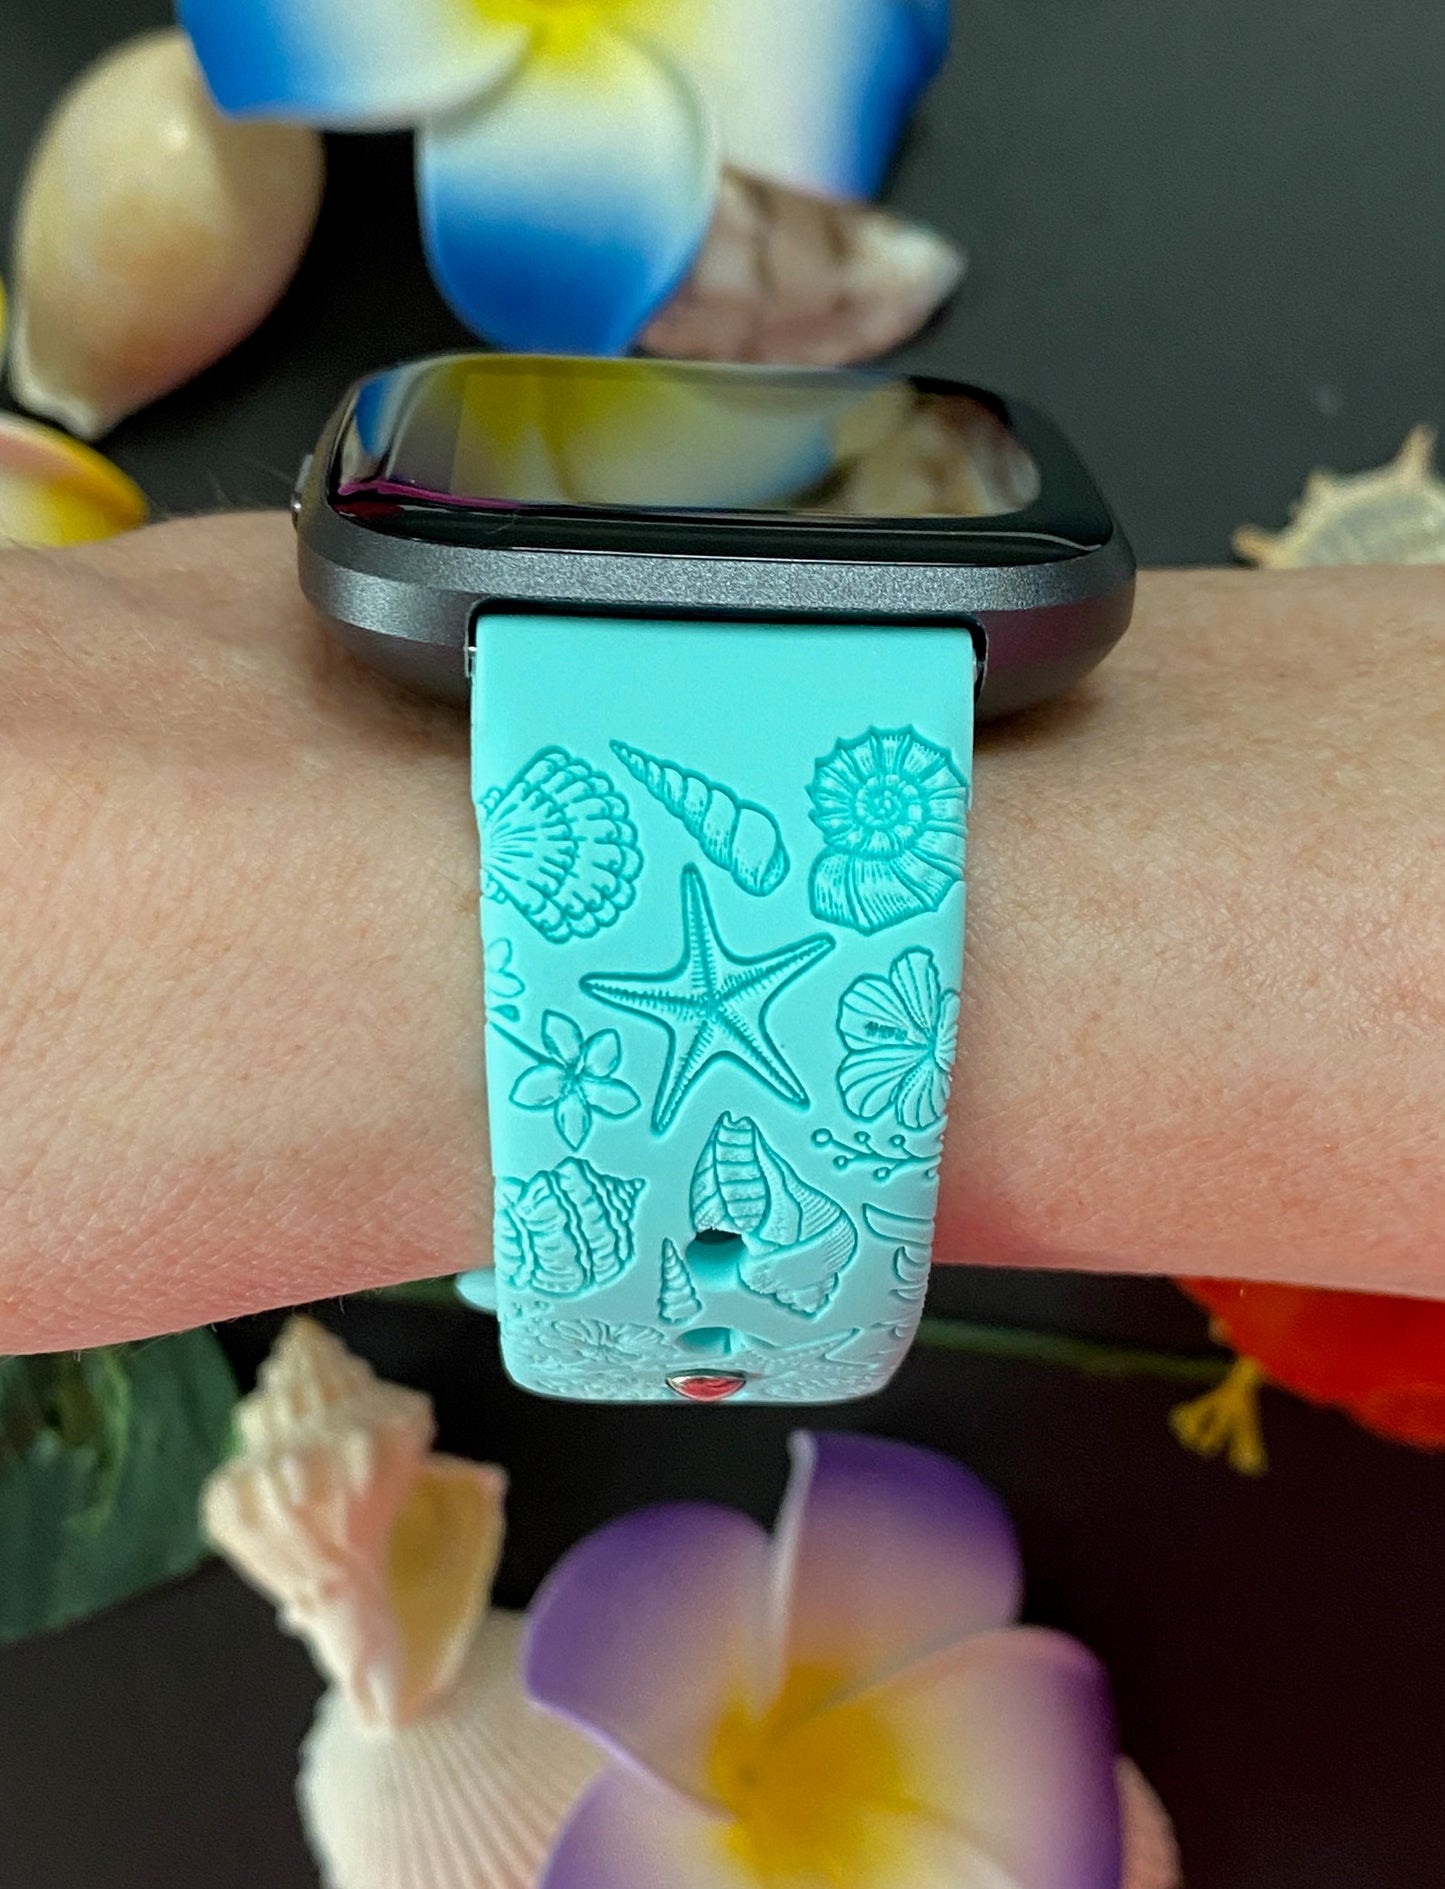 Seashell and Flowers Fitbit Versa 1/2 Watch Band